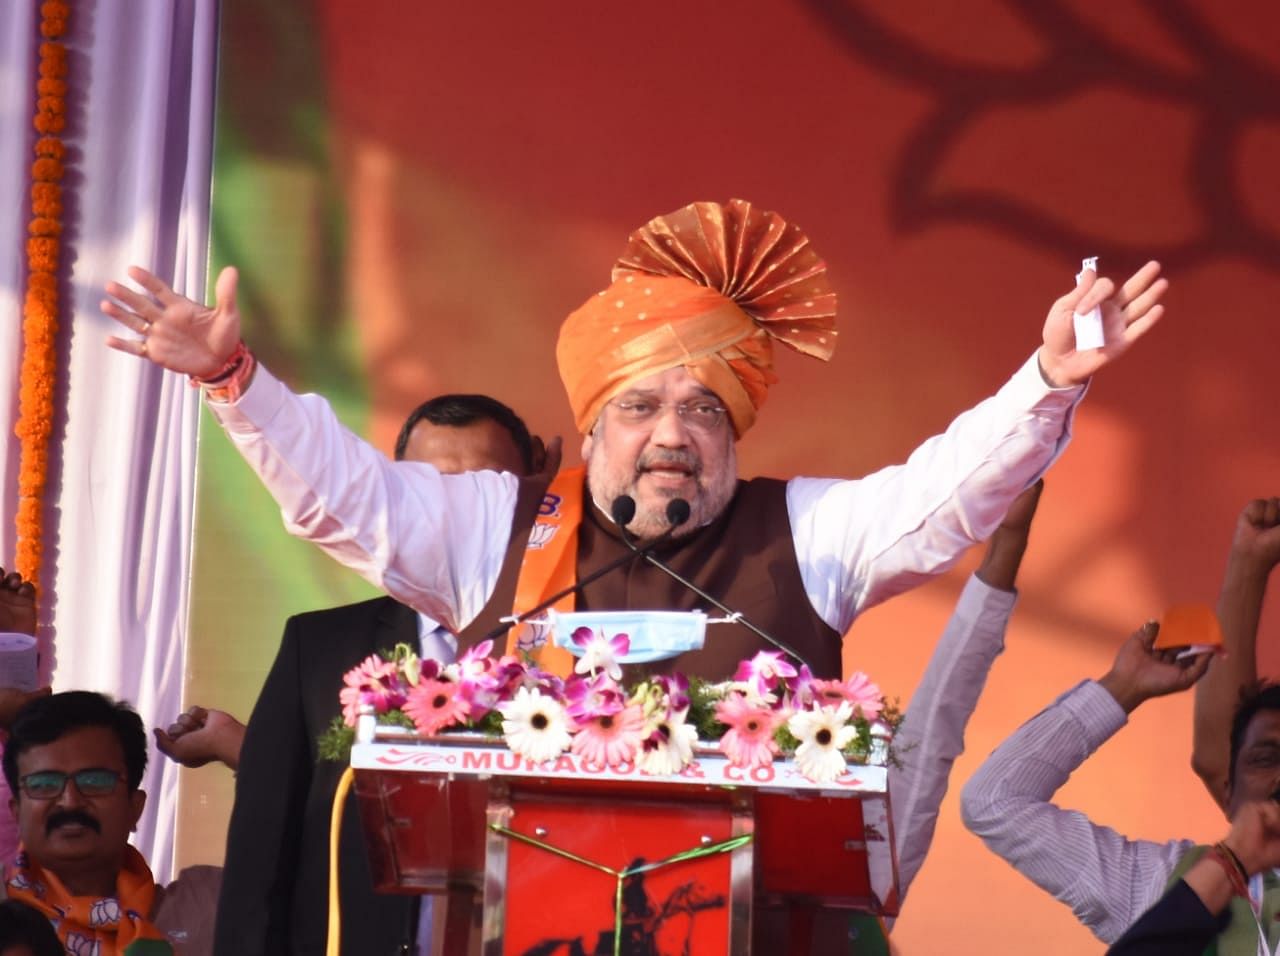 Union Home Minister Amit Shah speaking at valedictory programme of Jansevak Samavesh organised by BJP to congratulate party workers and supporters elected to the Gram Panchayat’s at District Stadium in Belagavi on Sunday. Credit: DH Photo